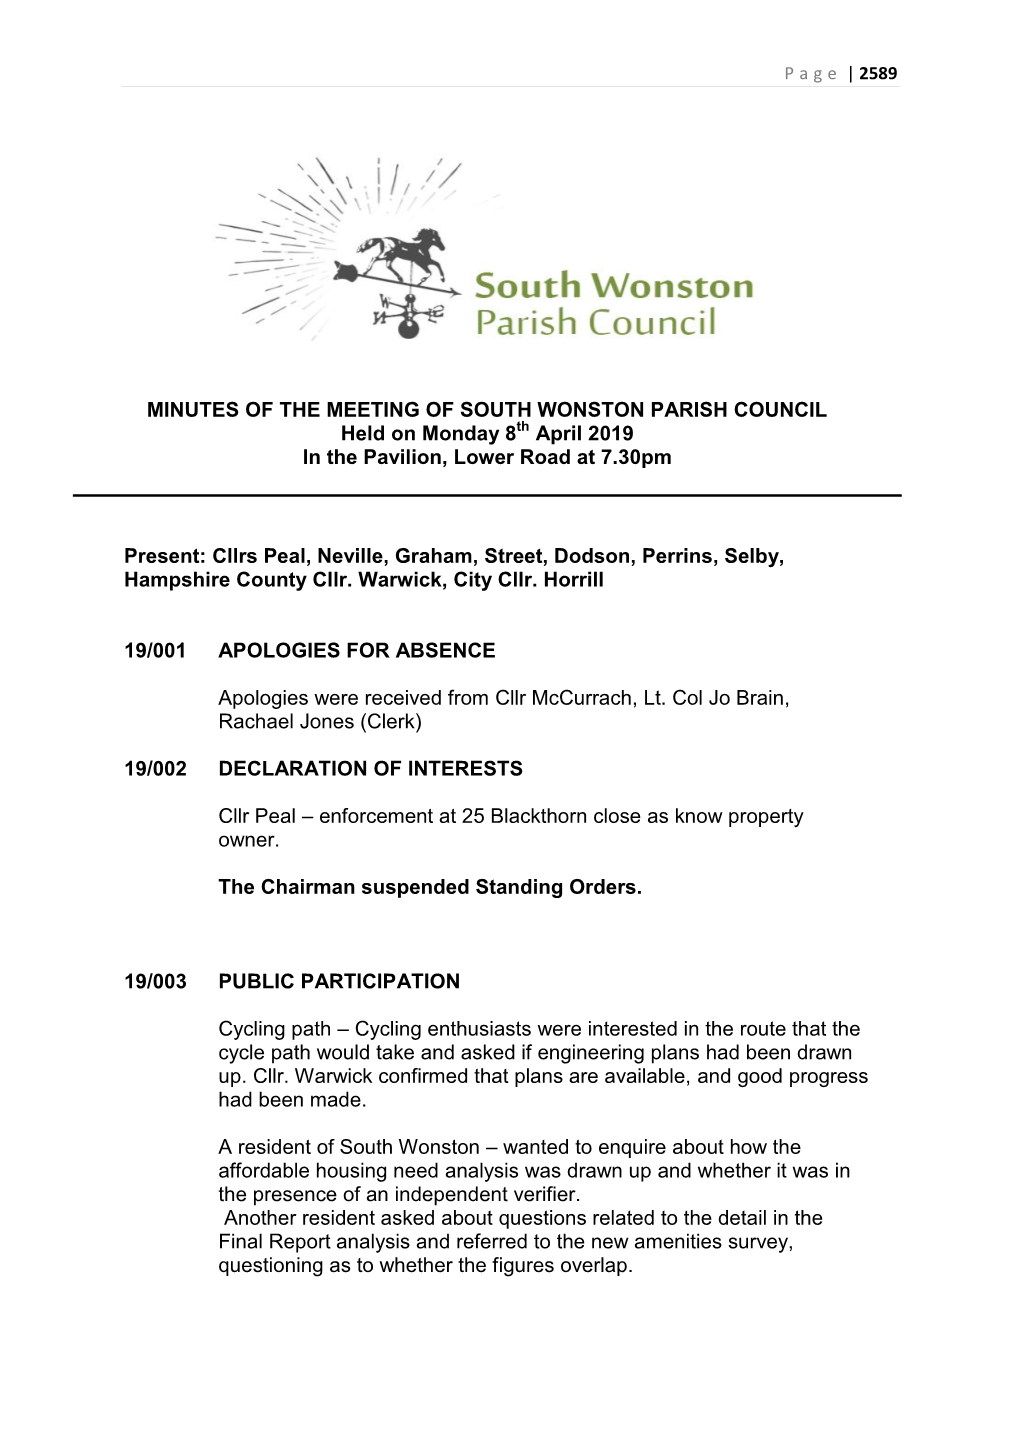 MINUTES of the MEETING of SOUTH WONSTON PARISH COUNCIL Held on Monday 8Th April 2019 in the Pavilion, Lower Road at 7.30Pm